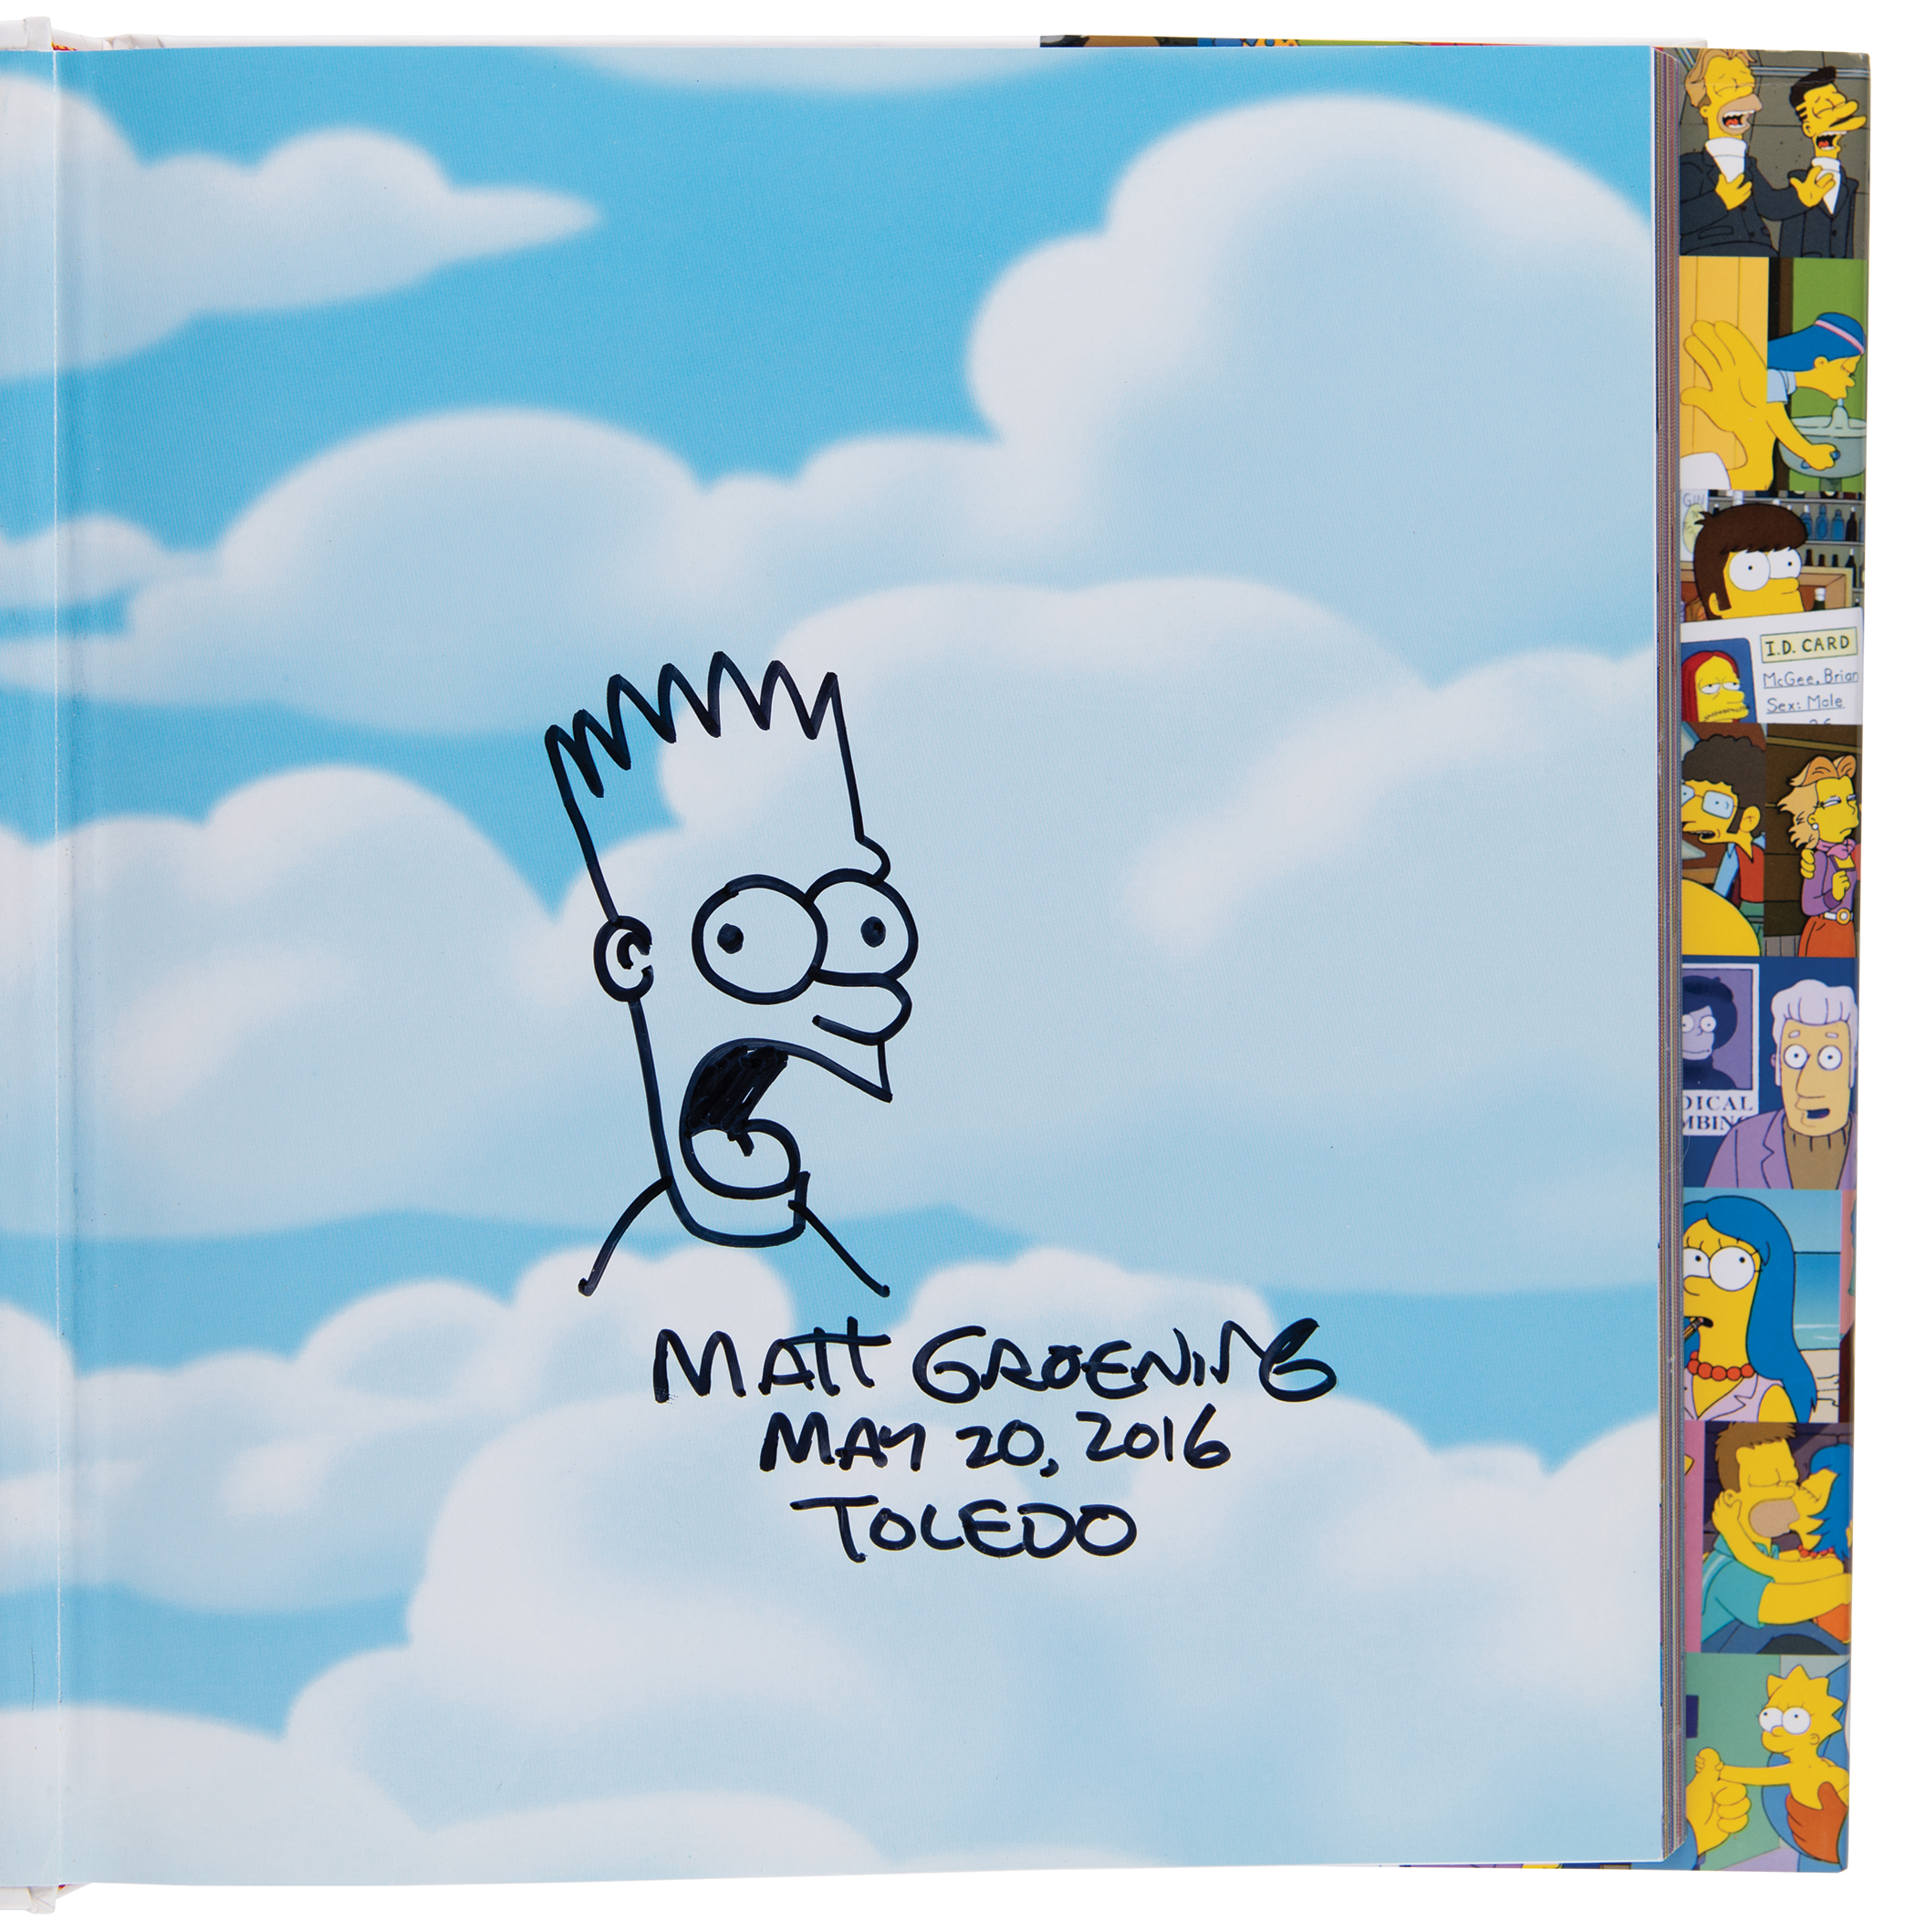 Lot #568 Matt Groening Signed Book with 'Bart Simpson' Sketch - Image 4